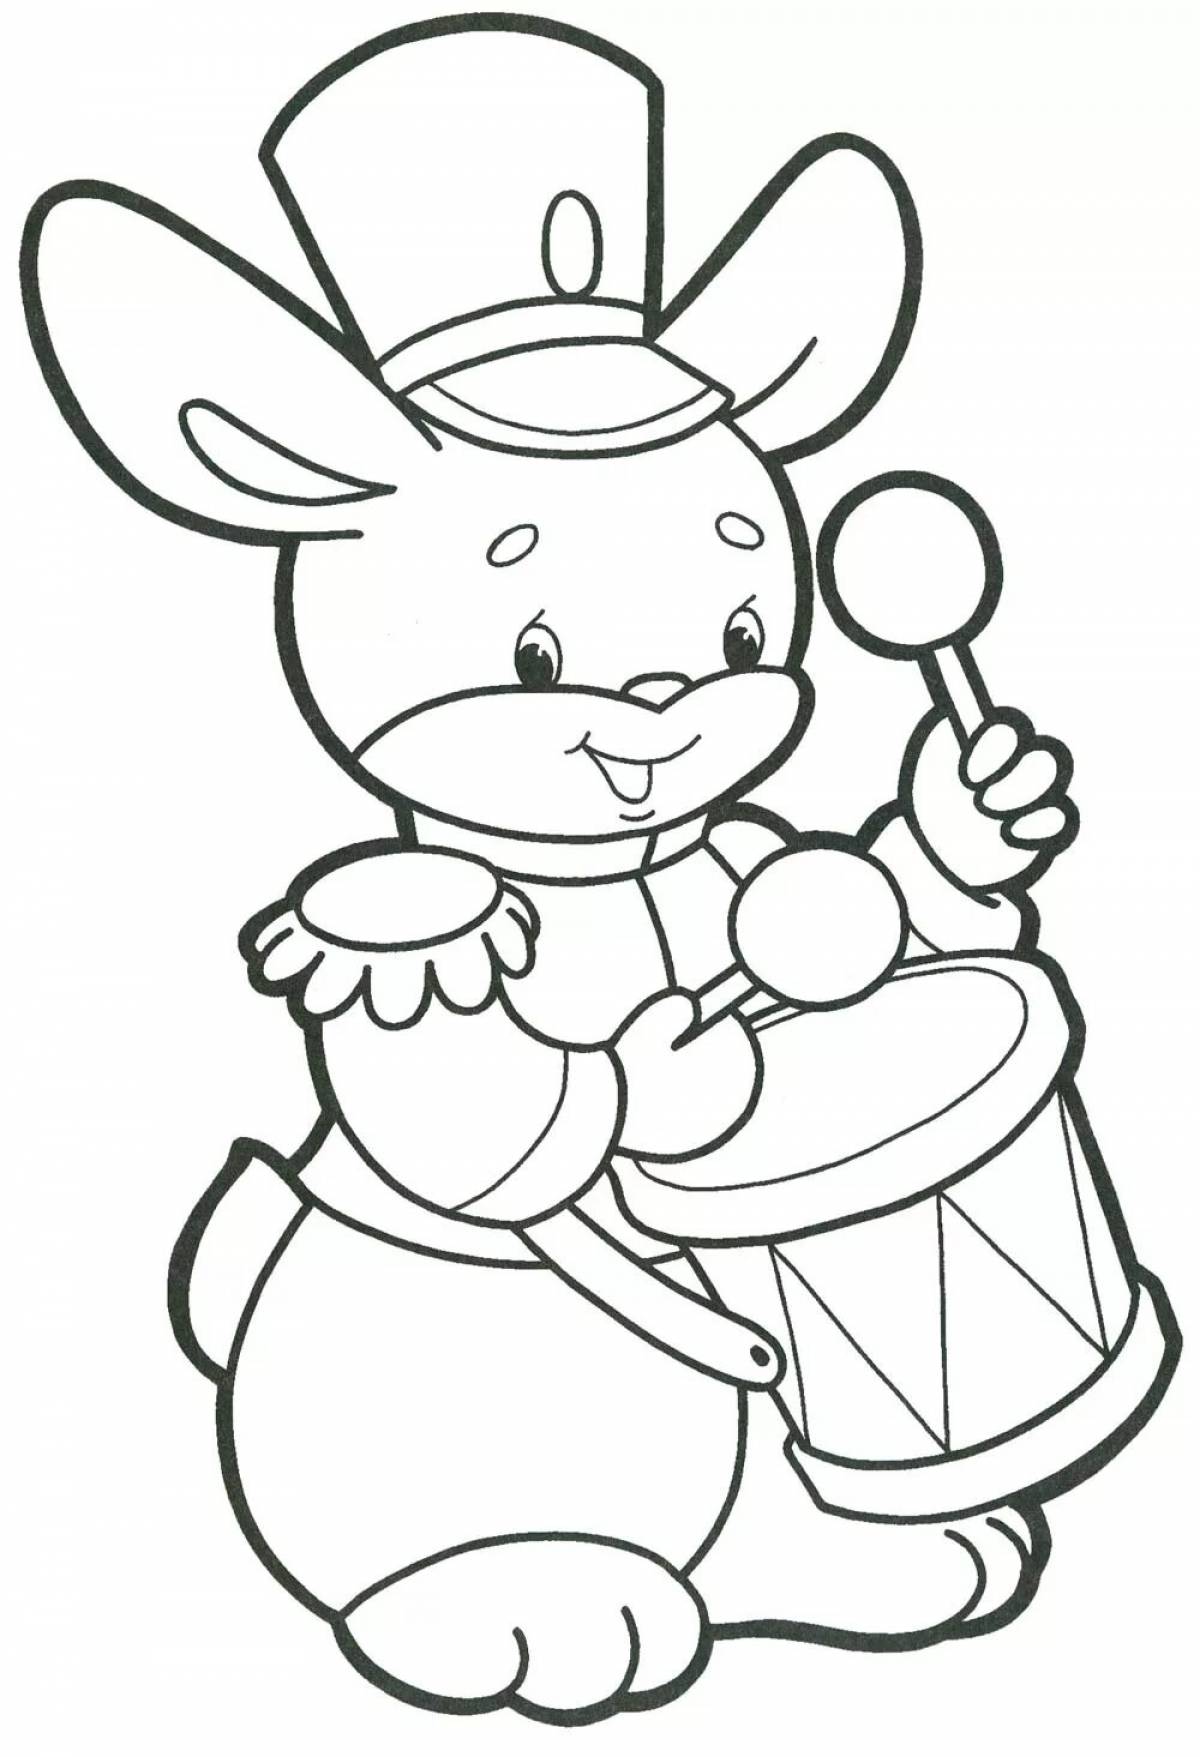 Coloured Christmas rabbit coloring book